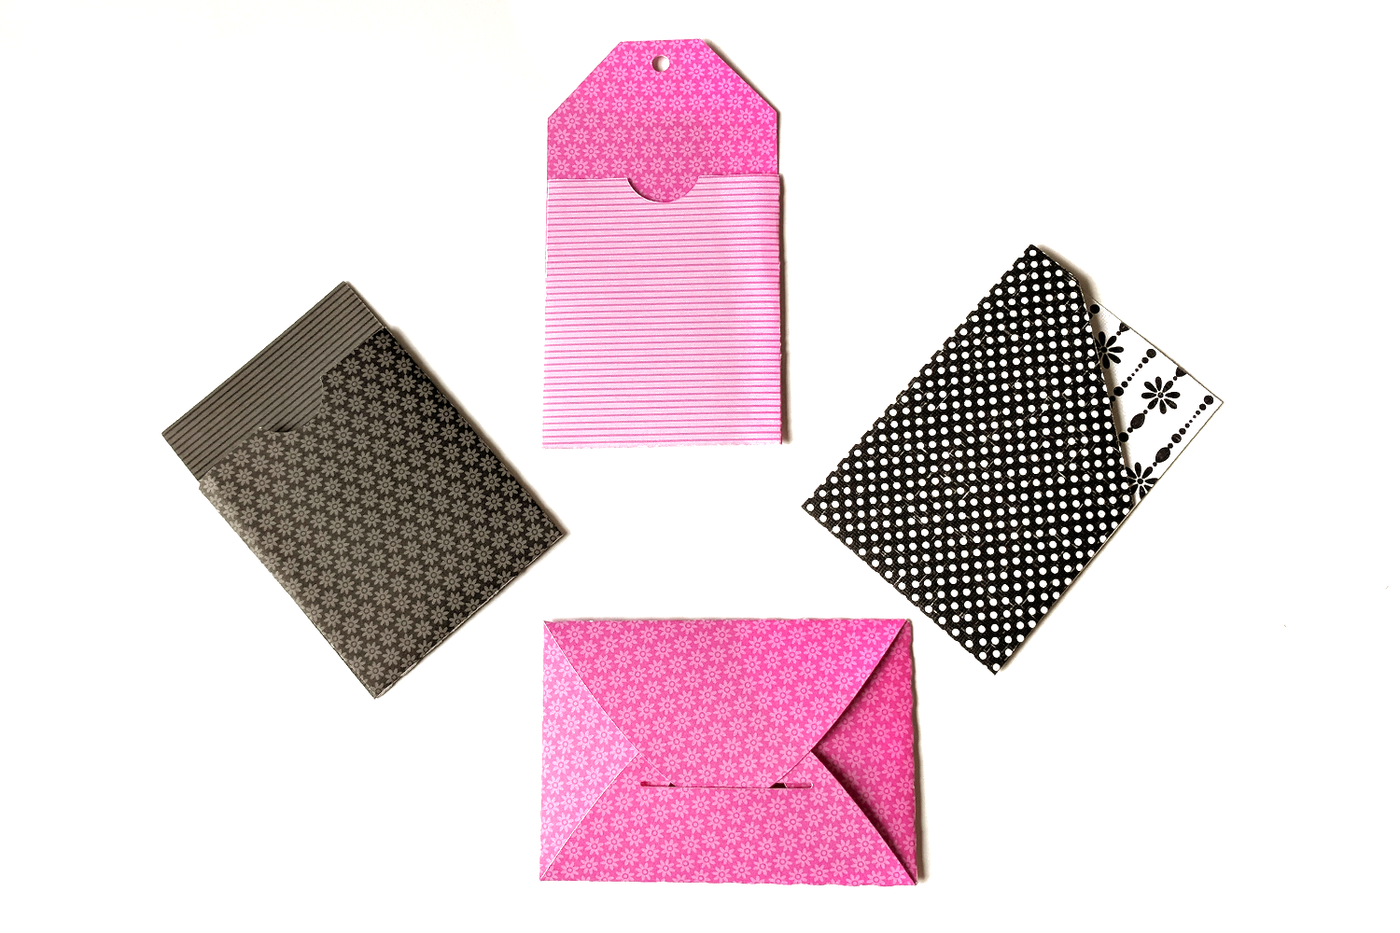 4 different gift card sleeves in pretty patterned paper.